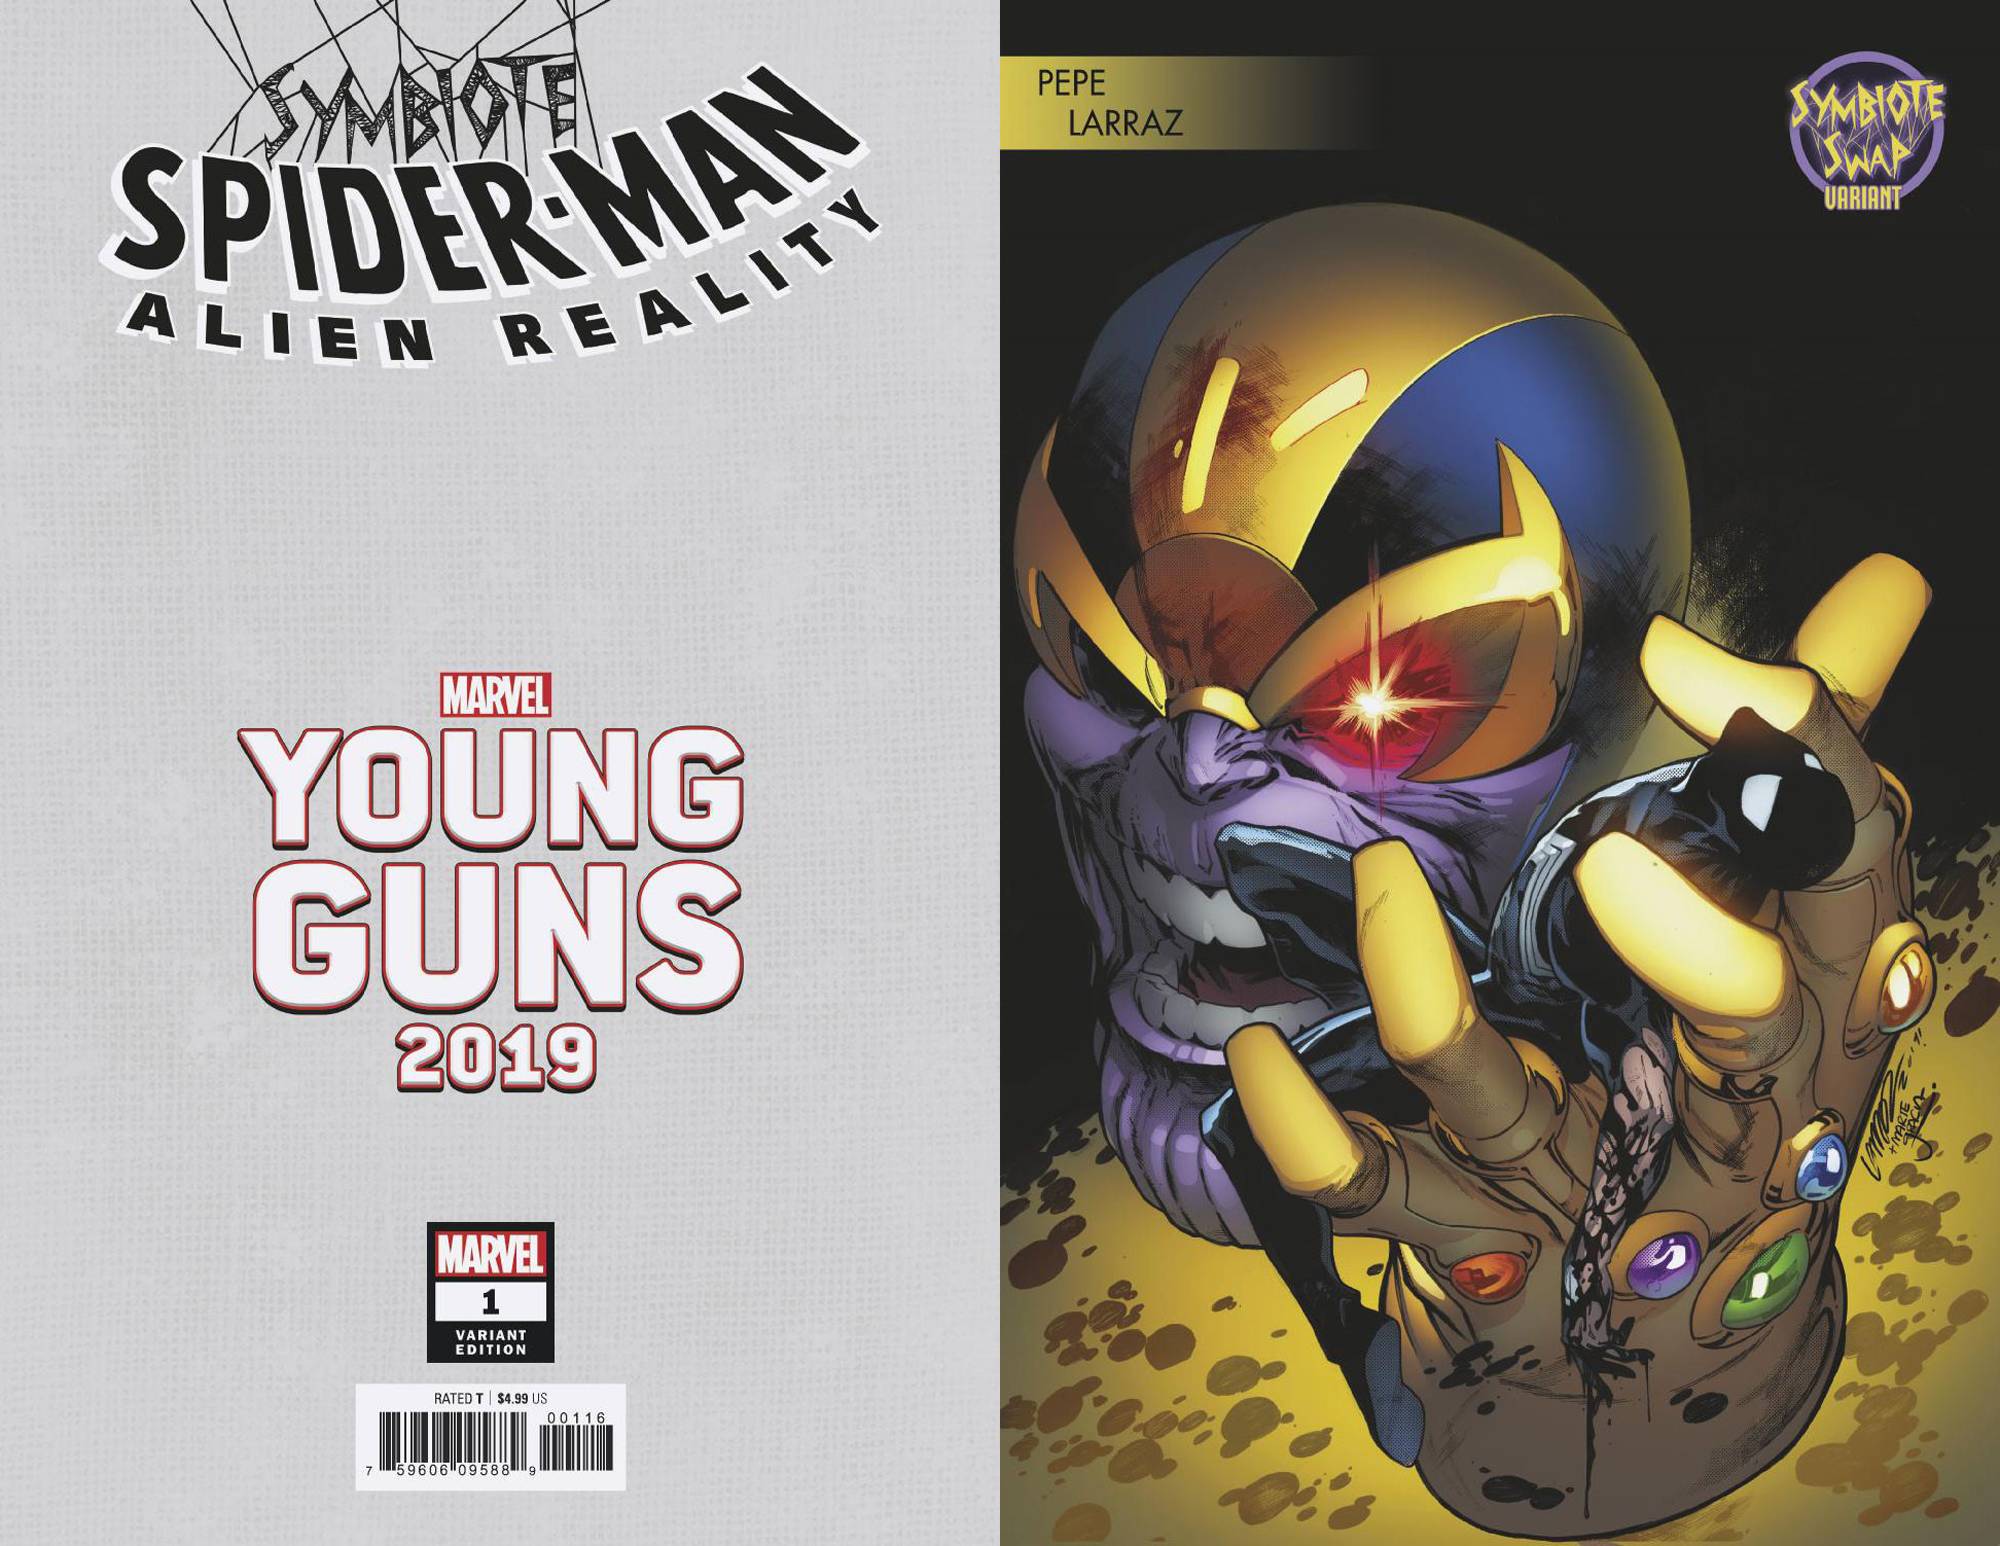 Symbiote Spider-Man Alien Reality #1 Larraz Young Guns Variant (Of 5)